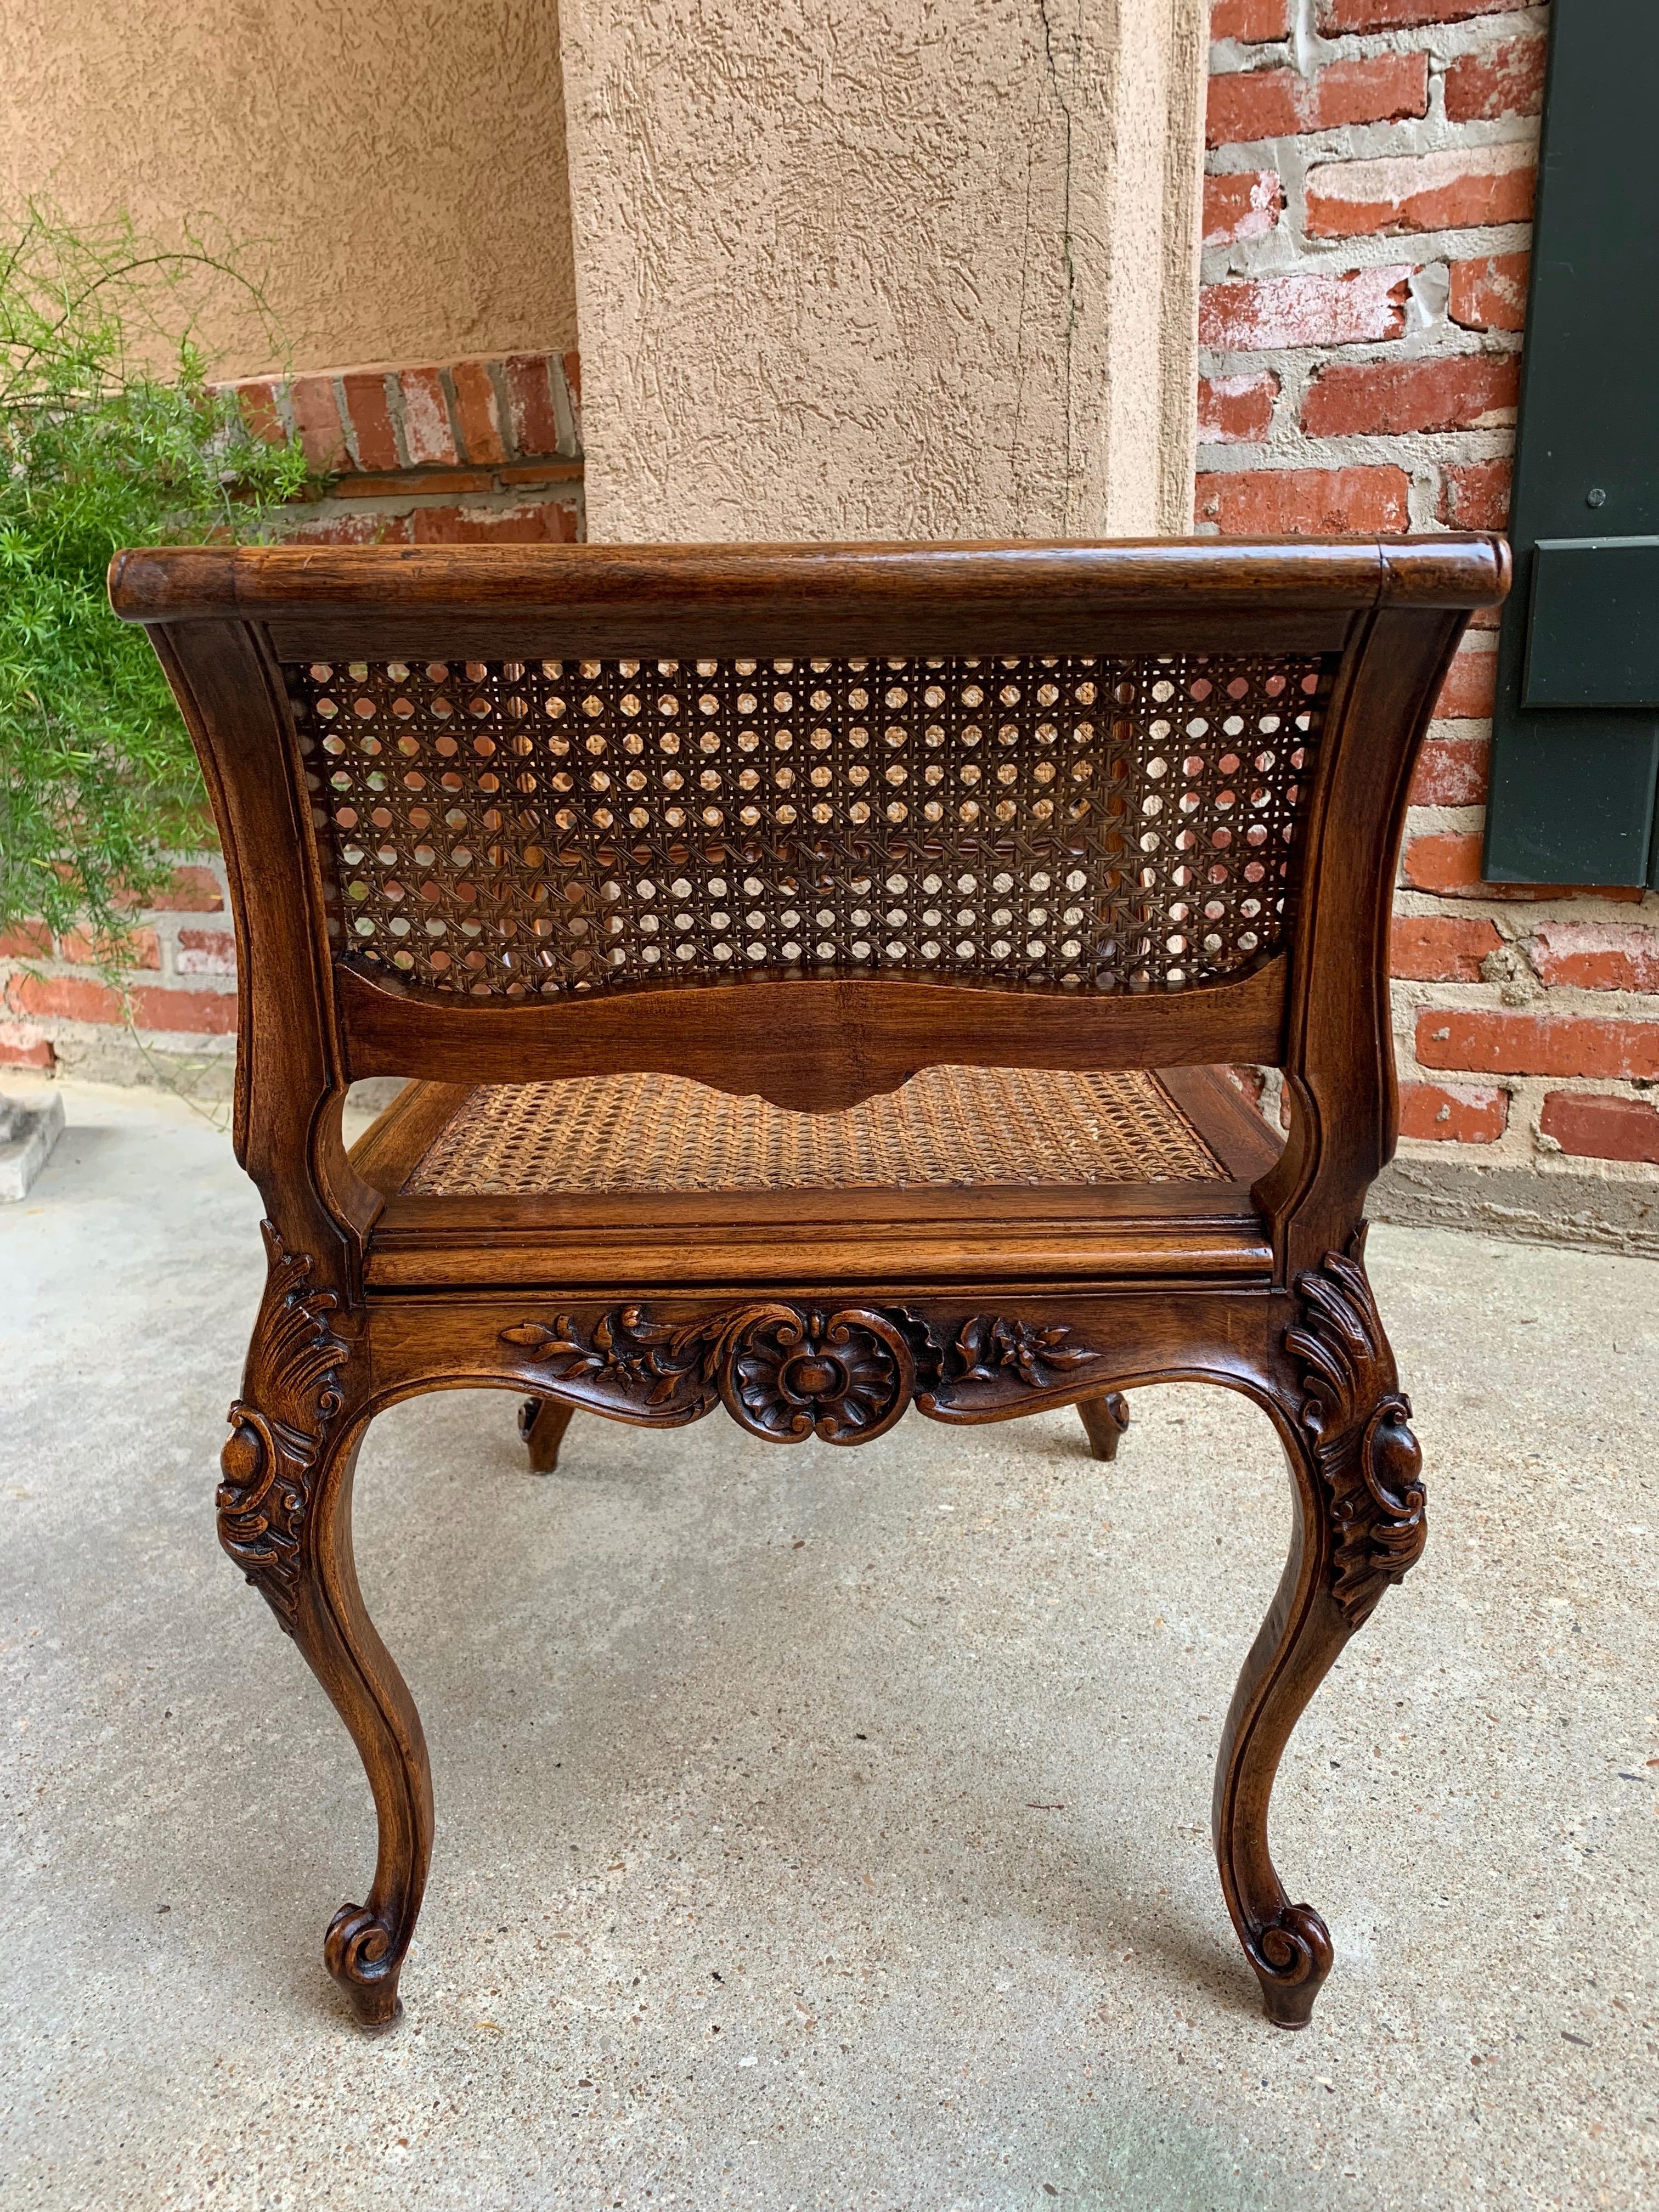 Hand-Carved Antique French Carved Oak Vanity Bench Stool Chair Cane Seat Louis XV c1890 For Sale